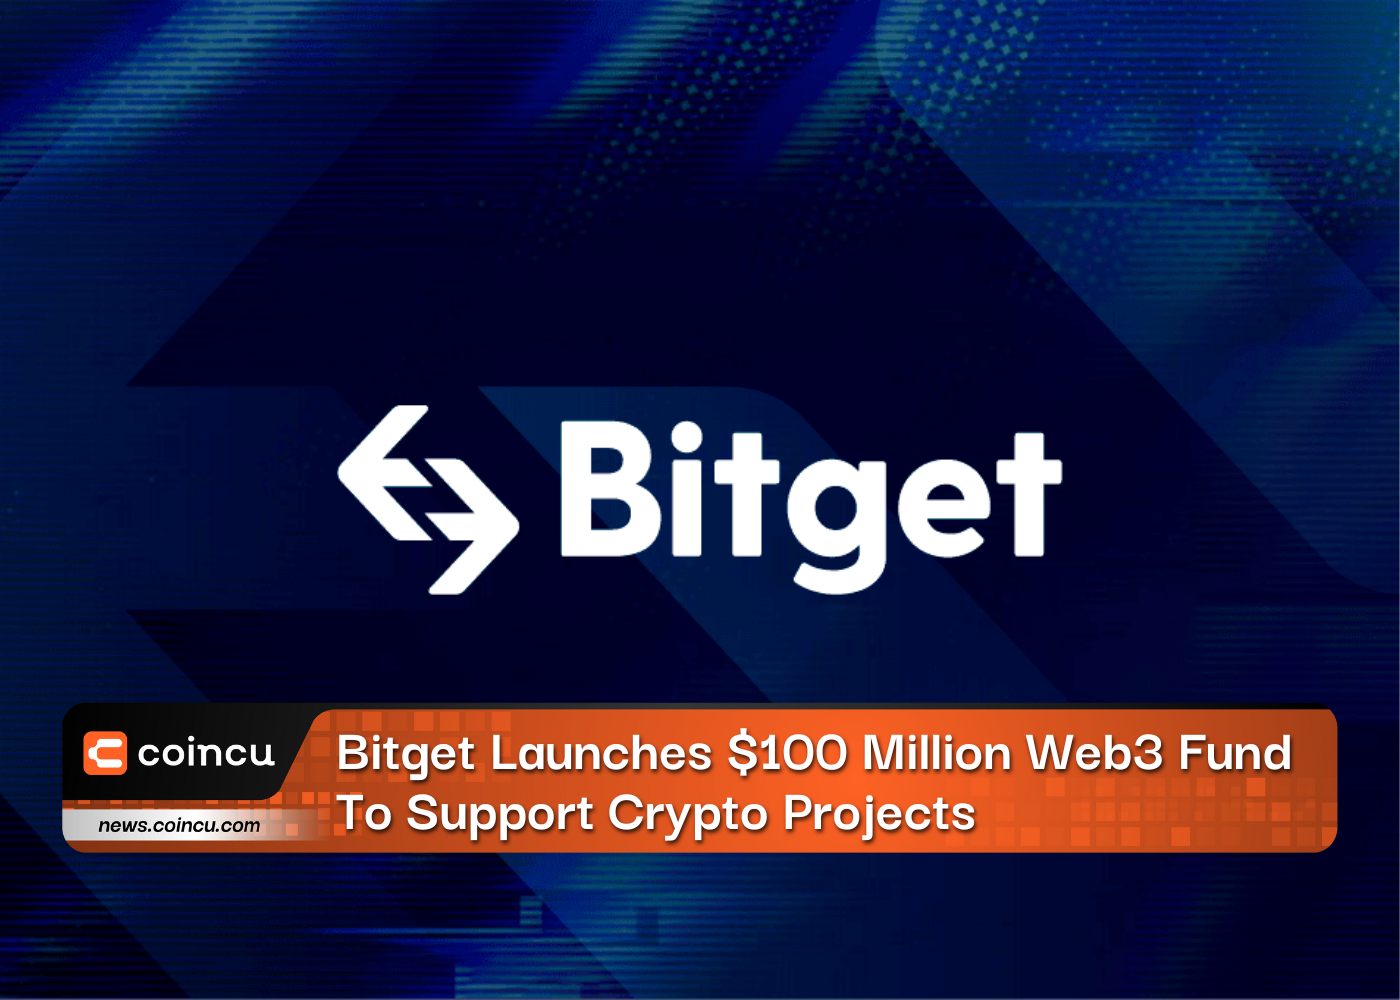 Bitget Launches $100 Million Web3 Fund To Support Crypto Projects